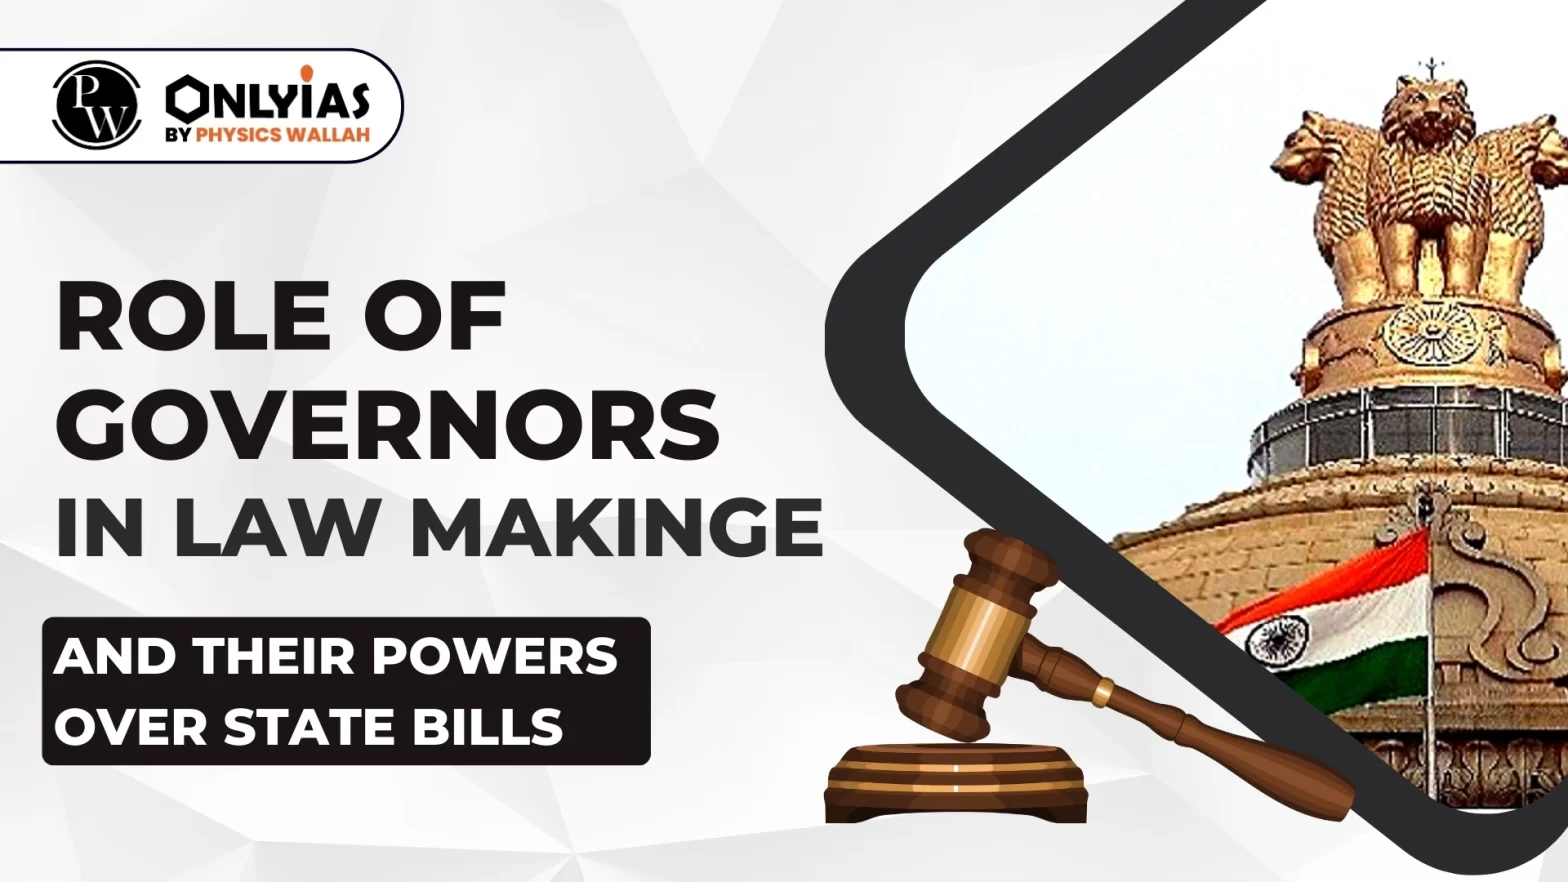 Role of Governors in Law Making and Their Powers Over State Bills